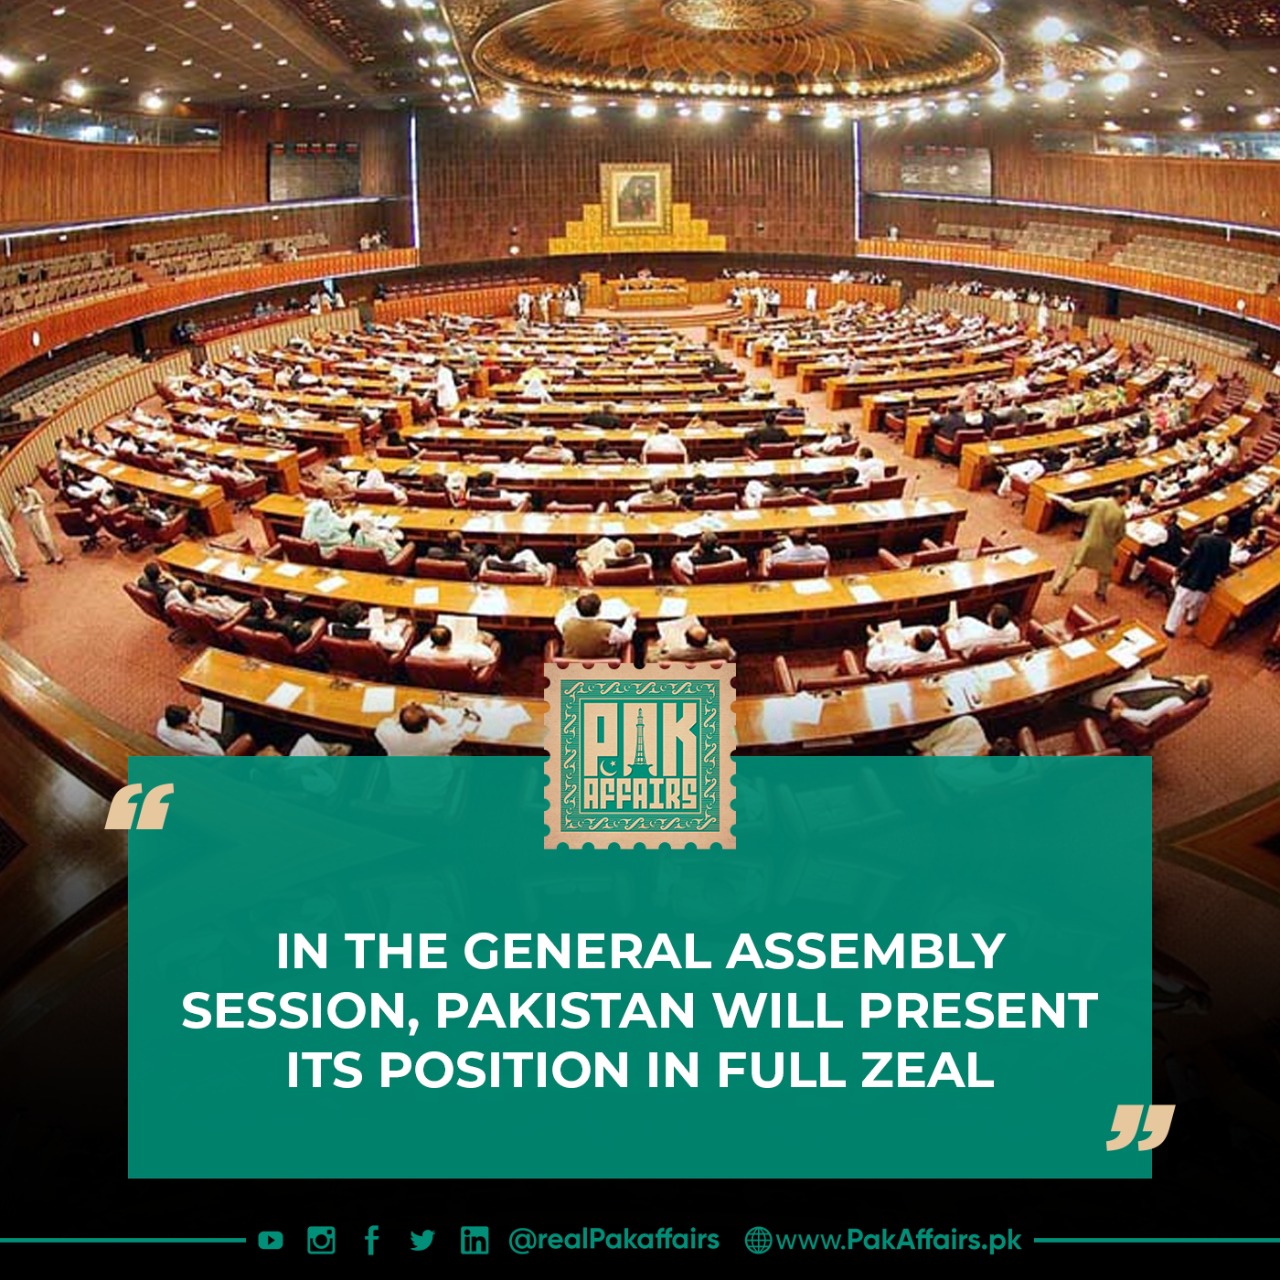 In the General Assembly session, Pakistan will present its position in full zeal.